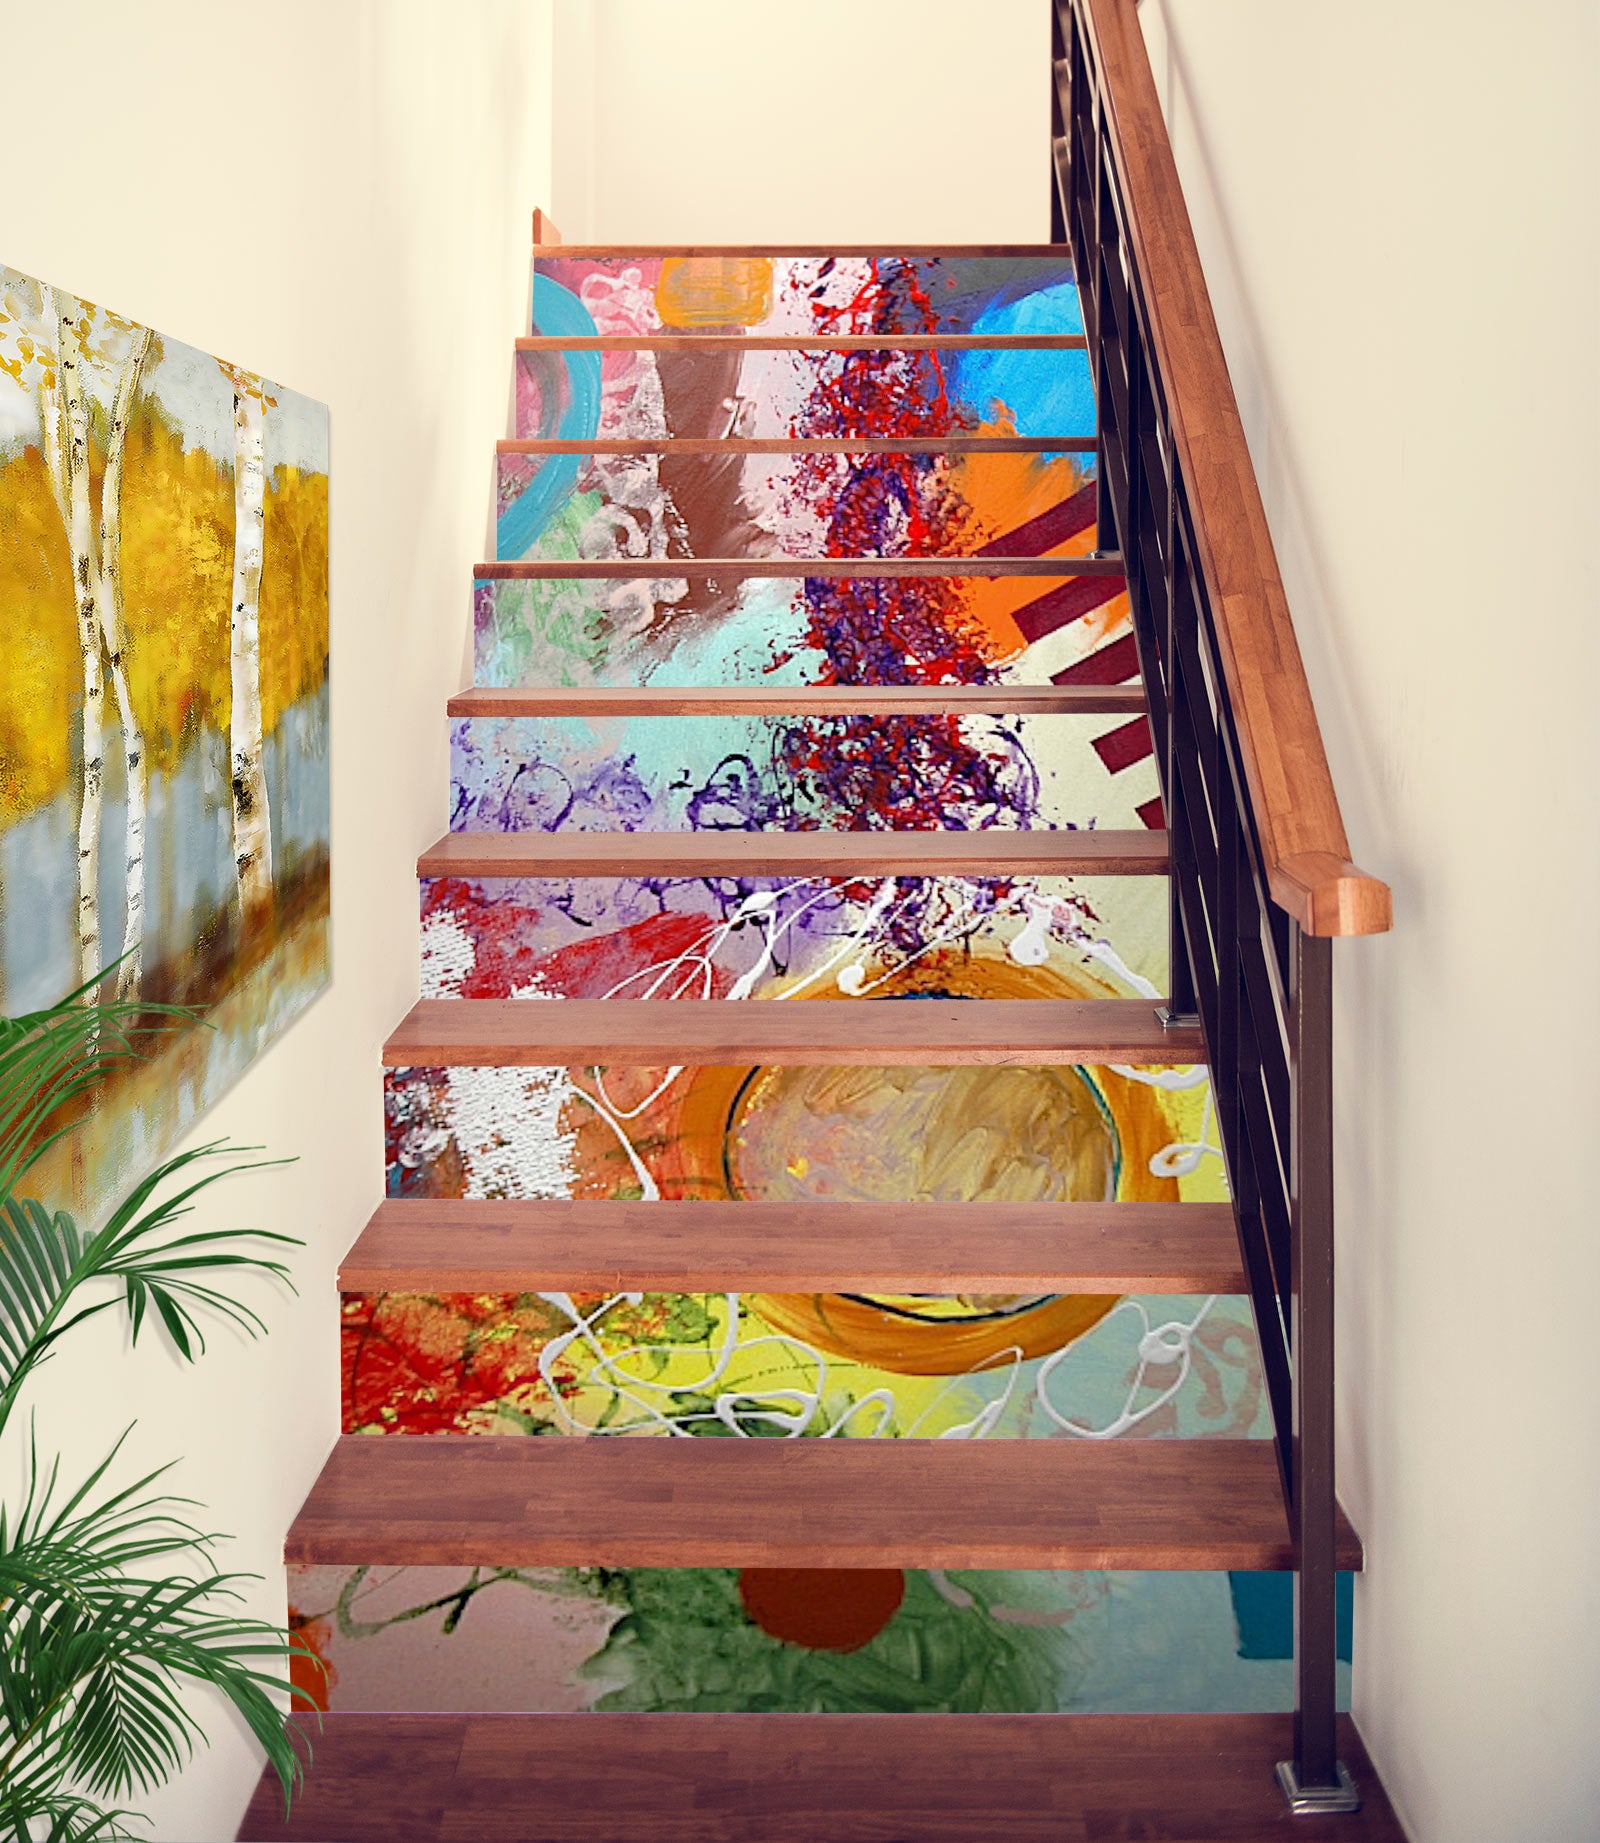 3D Colorful Pattern Texture 89131 Allan P. Friedlander Stair Risers